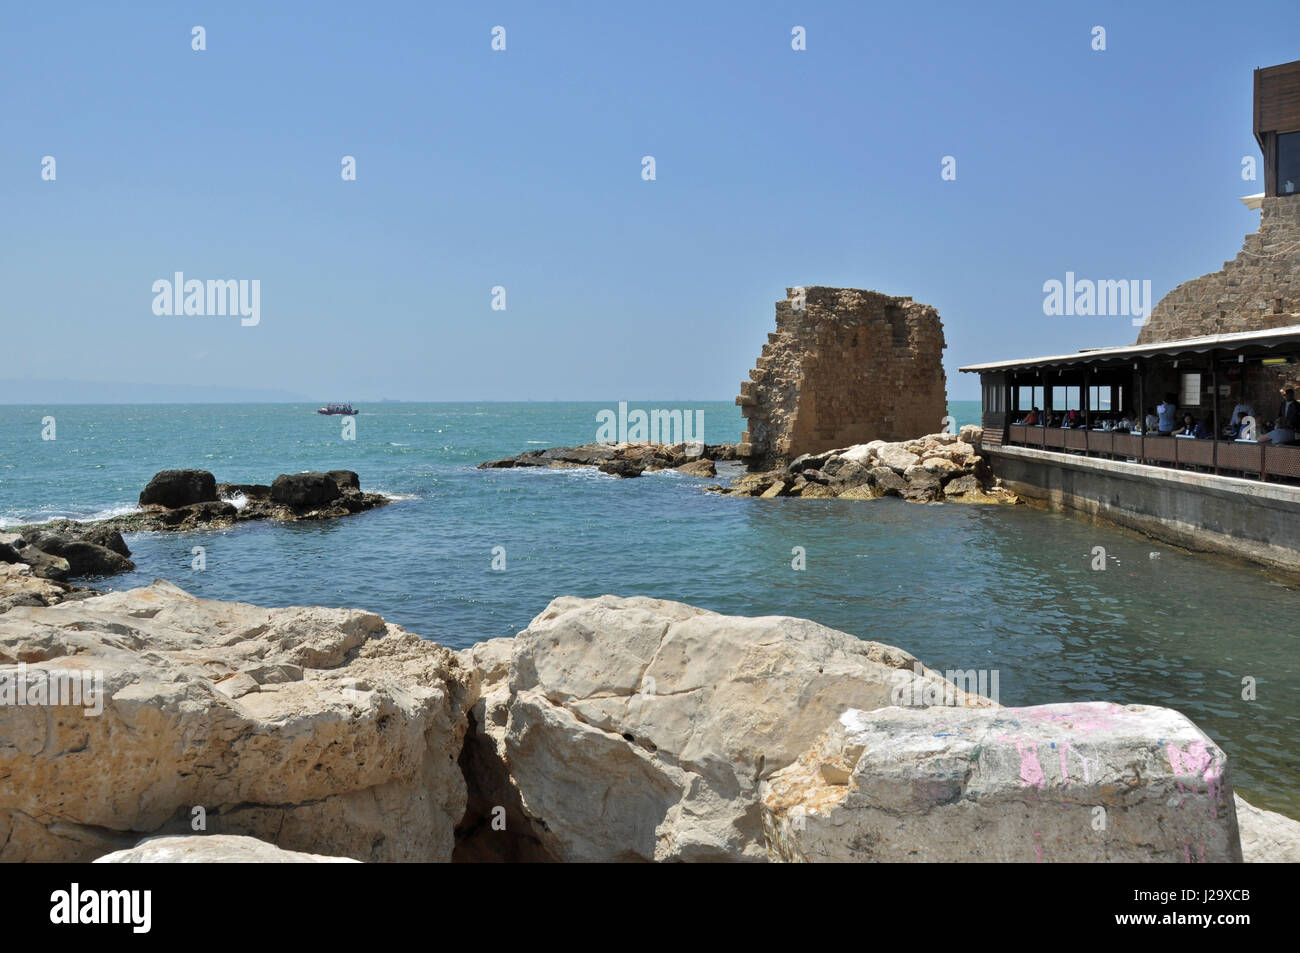 The harbour of Acre, Israel. Stock Photo